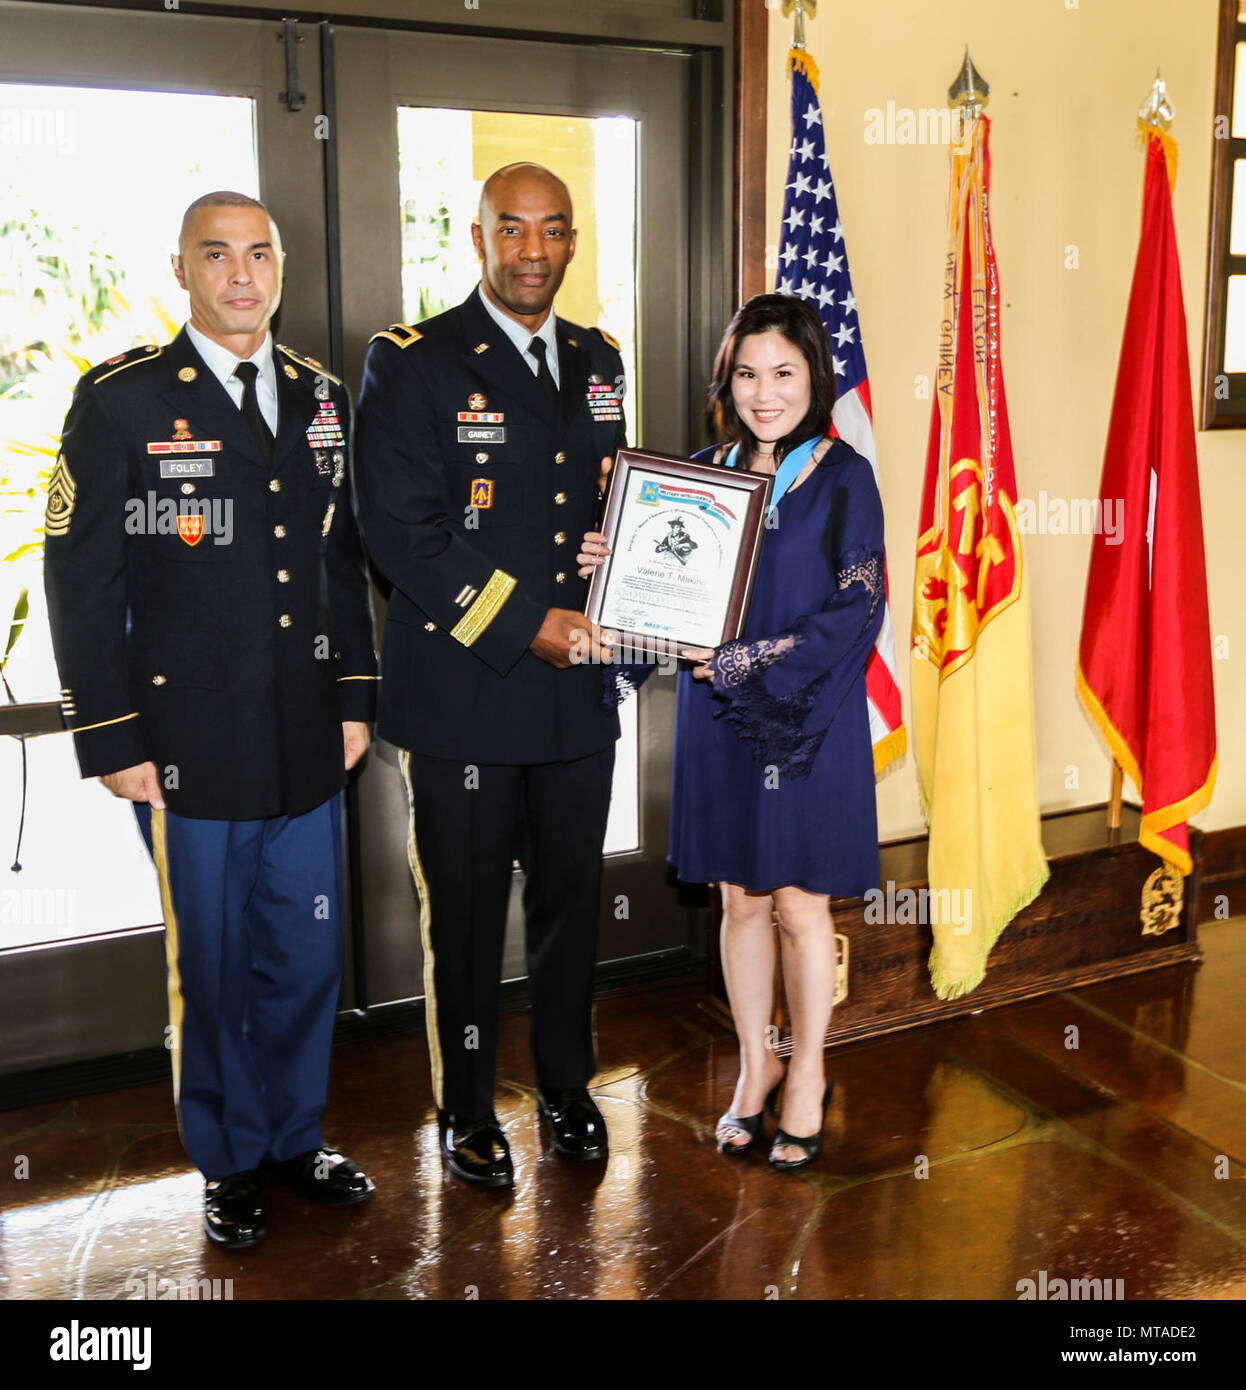 The command team for the 94th Army Air and Missile Defense Command, Brig. Gen. Sean A. Gainey (middle) and Command Sgt. Maj. John W. Foley (left), present the Lt. Col. Thomas Knowlton Award to Ms. Valerie T. Makino, lead Korea branch analyst, Northeast Asia division, PACOM Joint Intelligence Operations Center during the 94th AAMDC Knowlton Awards Ceremony held at the Ka Makani Community Center, Joint Base Pearl Harbor-Hickam, Hawaii April 19. The Knowlton Award was established in June 1995 and recognizes individuals for making significant contributions during their careers to the Military Inte Stock Photo